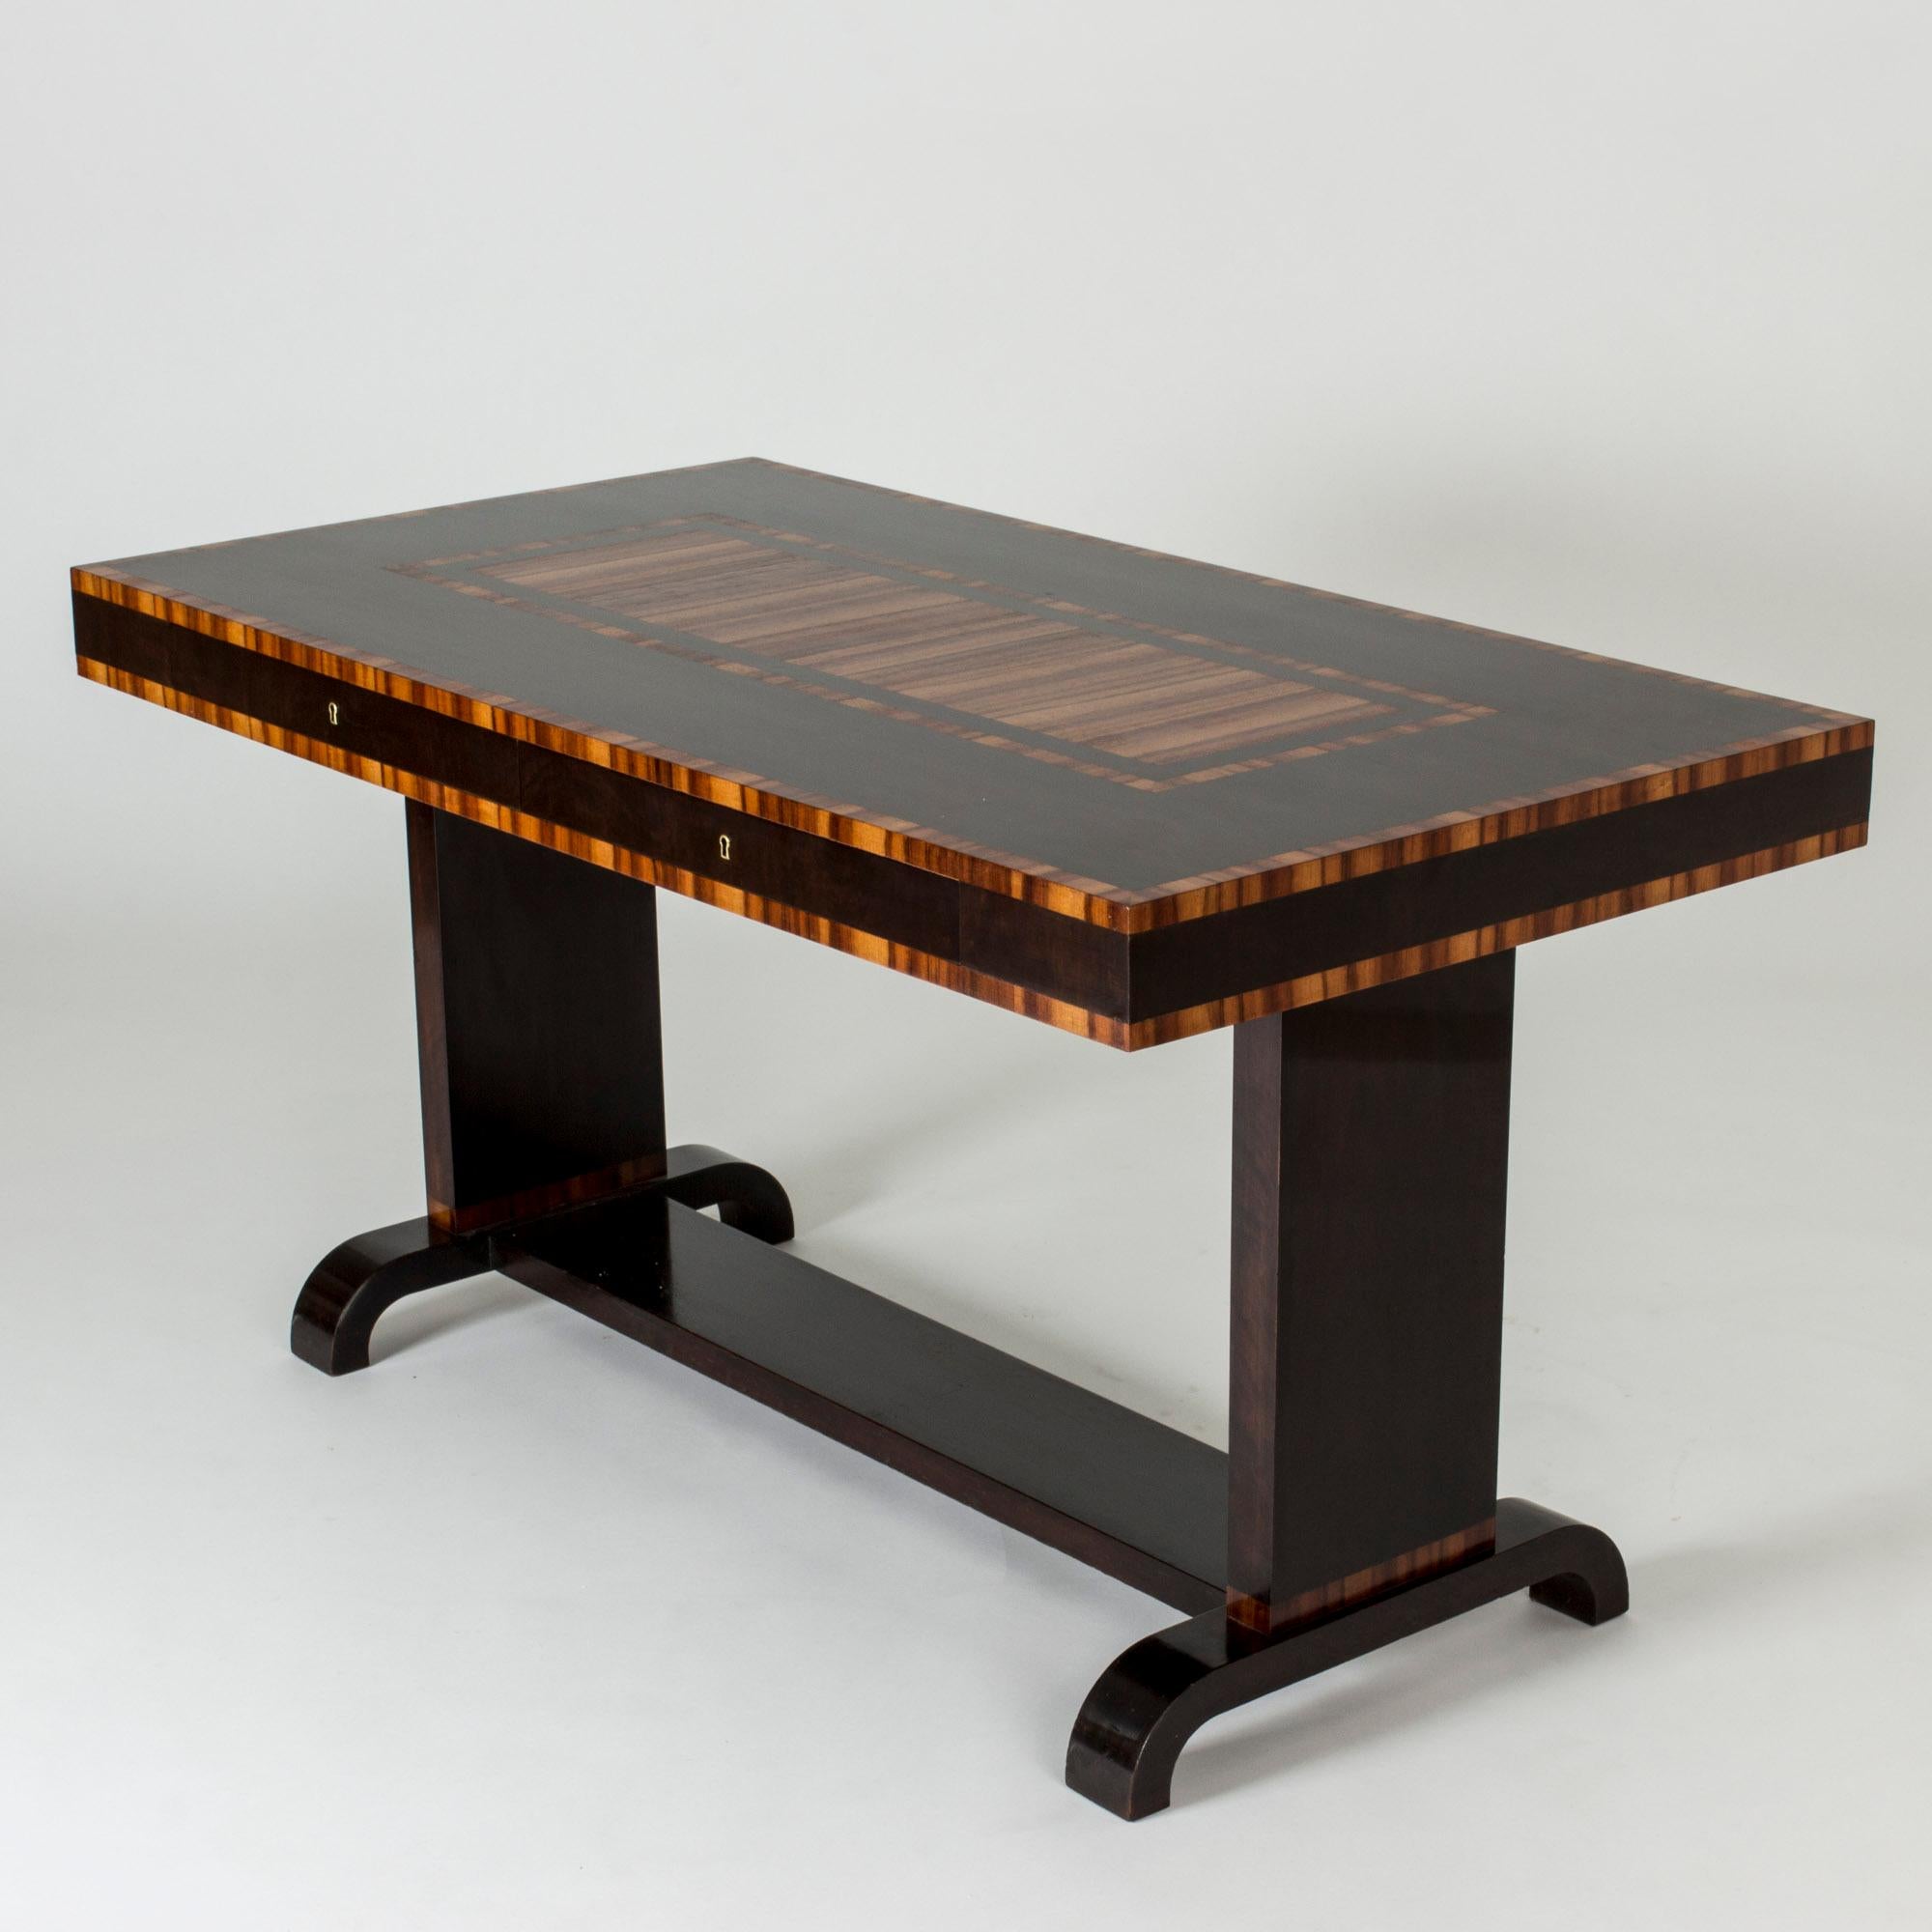 Stained Desk with Inlays, Axel Larsson, Bodafors, Sweden, 1930s